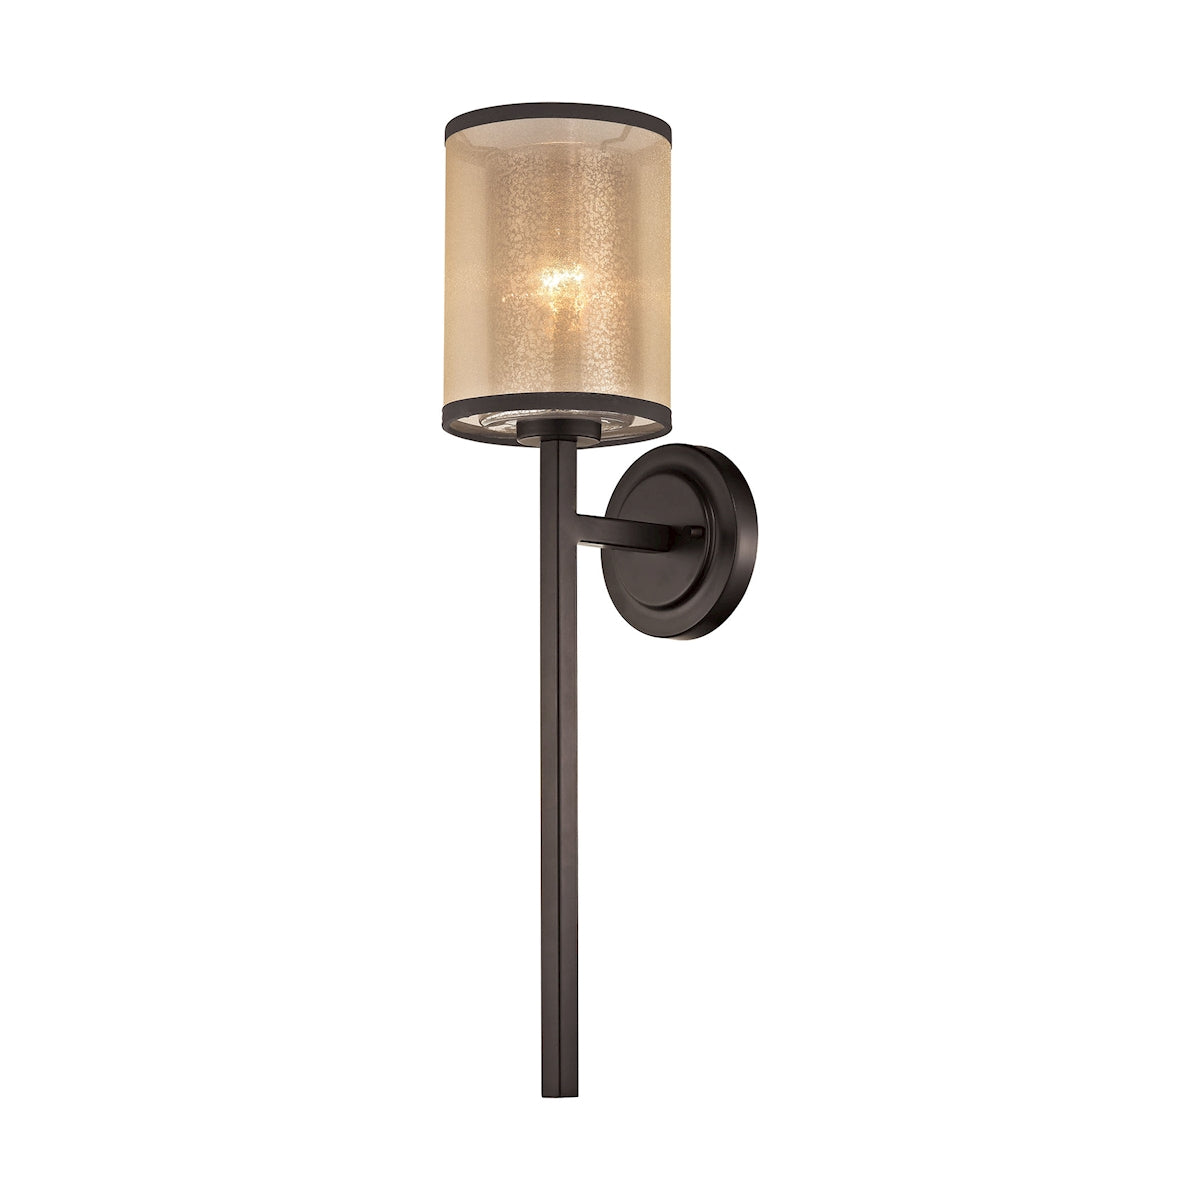 ELK Lighting 57023/1 - Diffusion 6" Wide 1-Light Wall Lamp in Oiled Bronze with Organza and Mercury